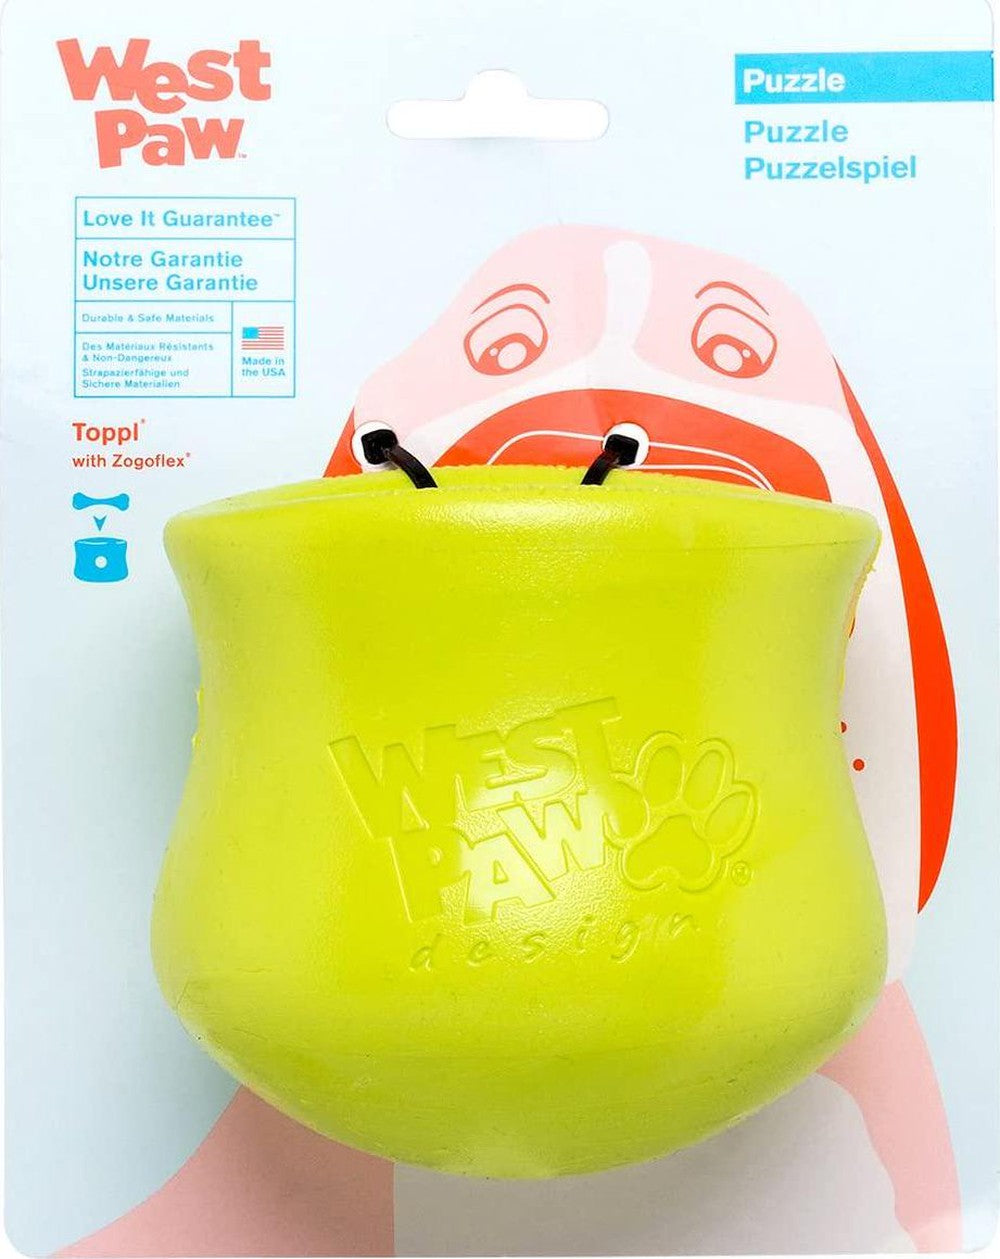 WEST PAW Zogoflex Toppl Treat Dispensing Dog Toy Puzzle Interactive Chew Toys for Dogs Dog Toy-